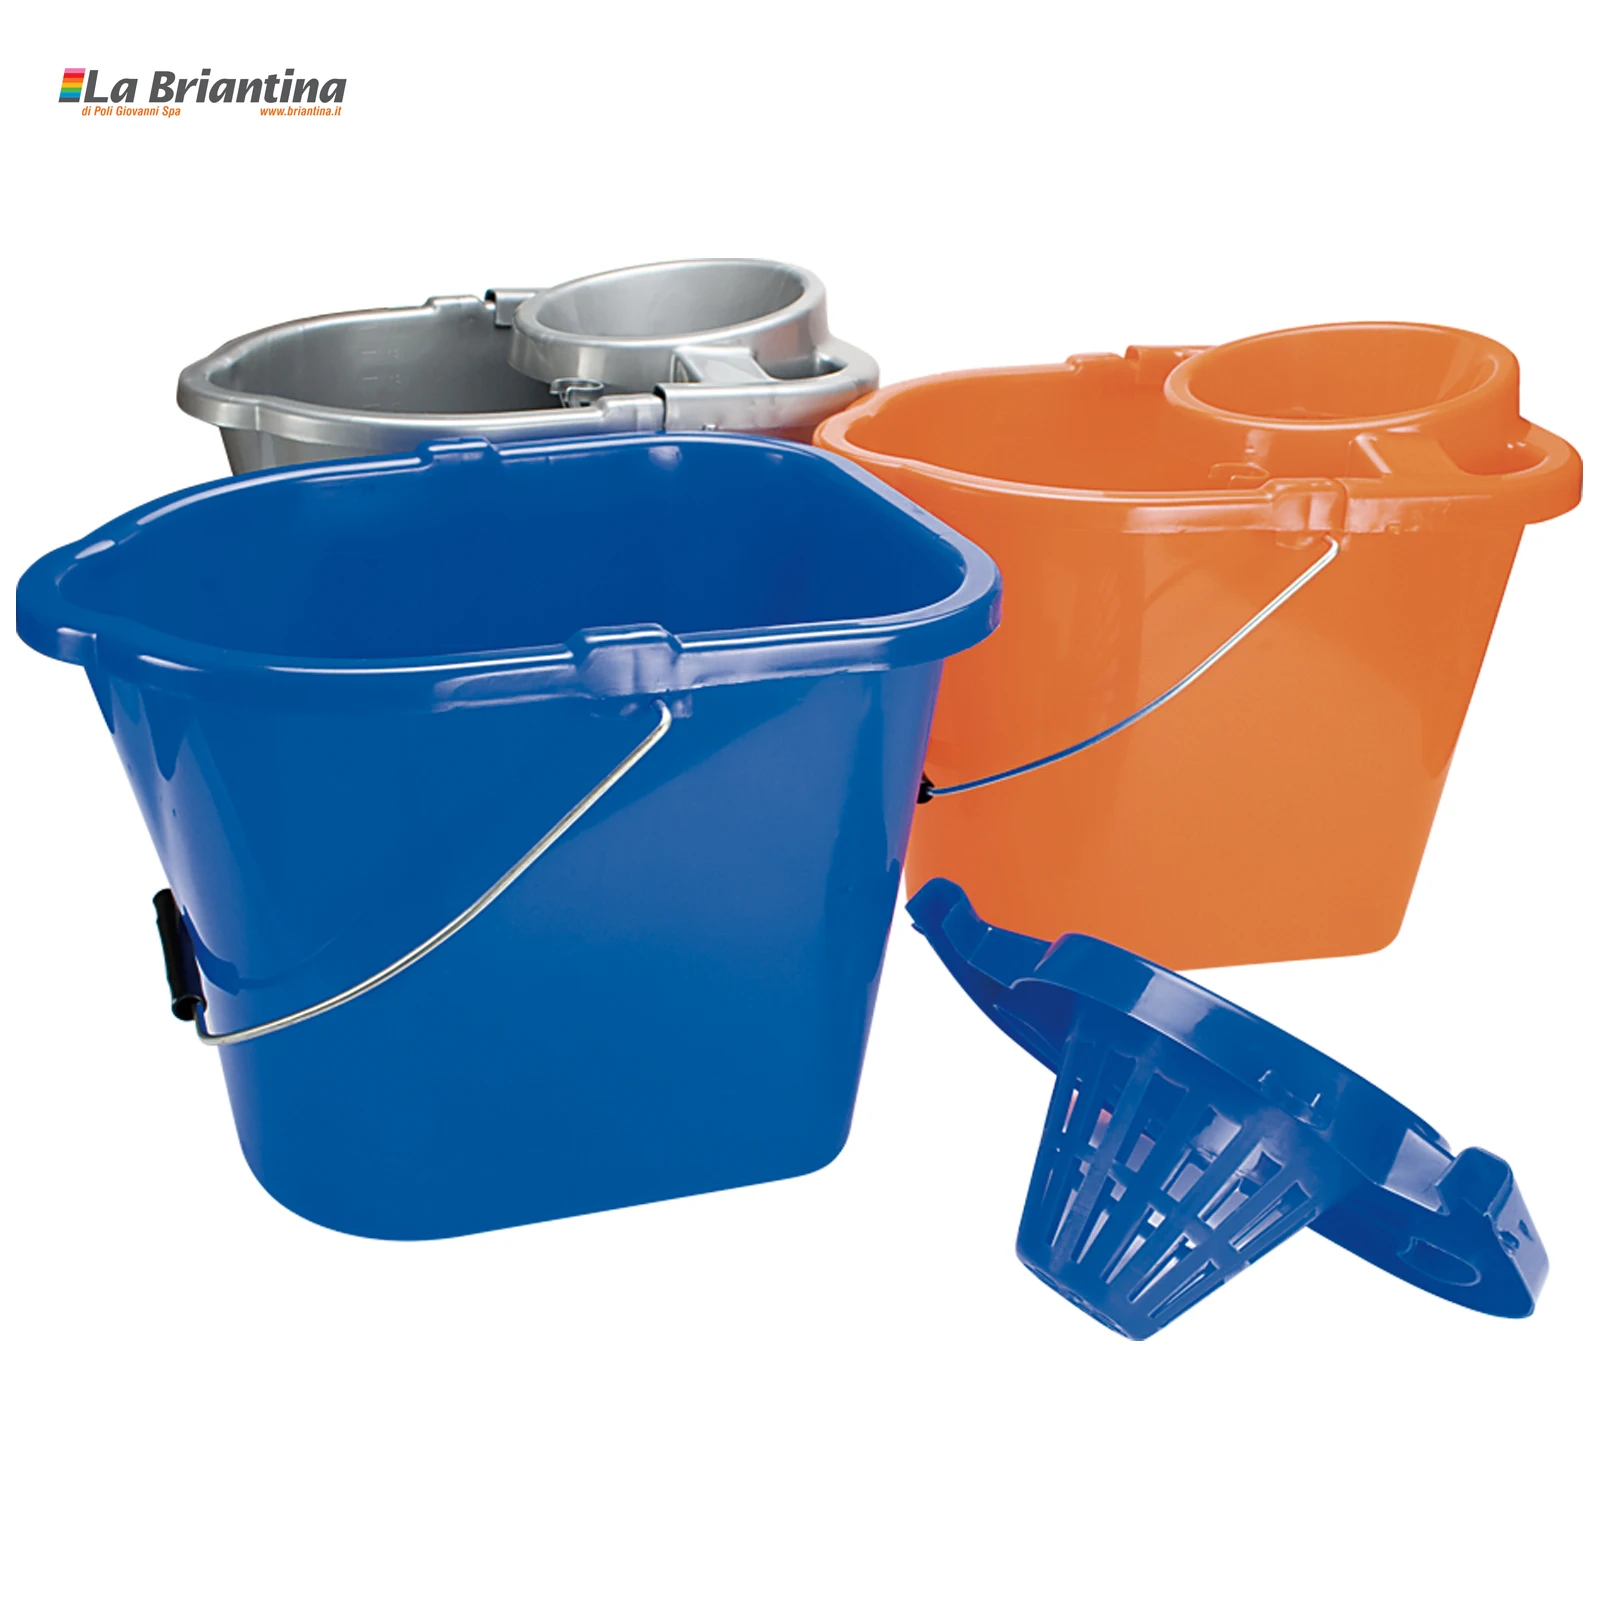 Large plastic Mop bucket with wringer 14 L-All purpose Home office restaurant-uk 